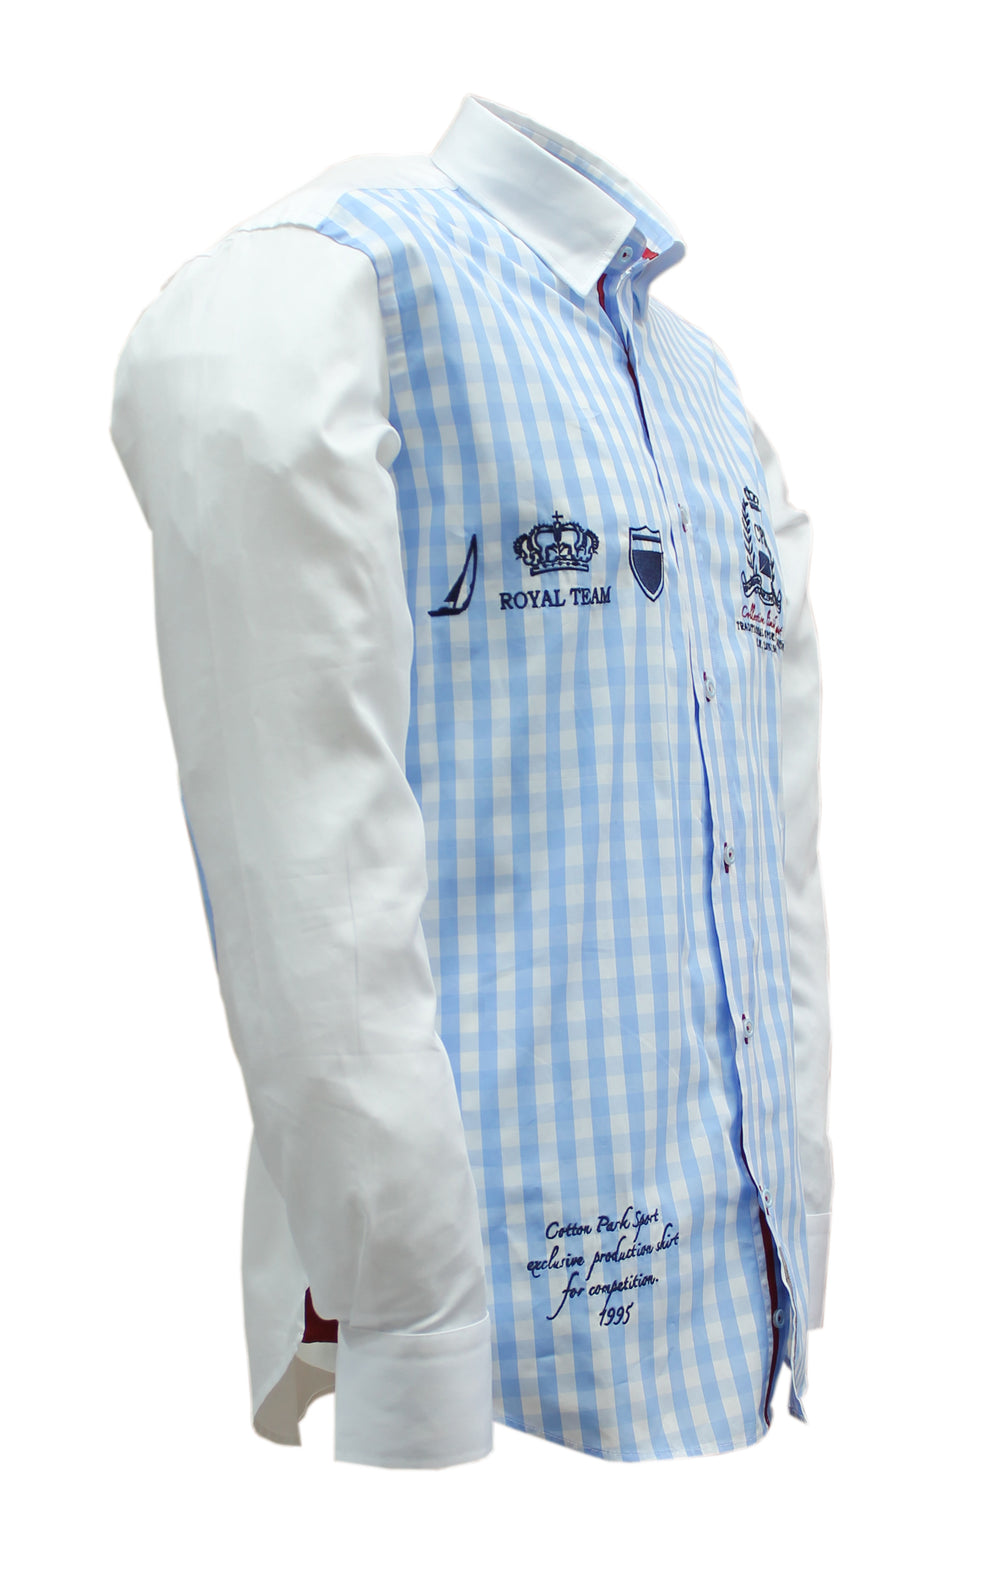 Embroidered sky blue gingham sport chic shirt